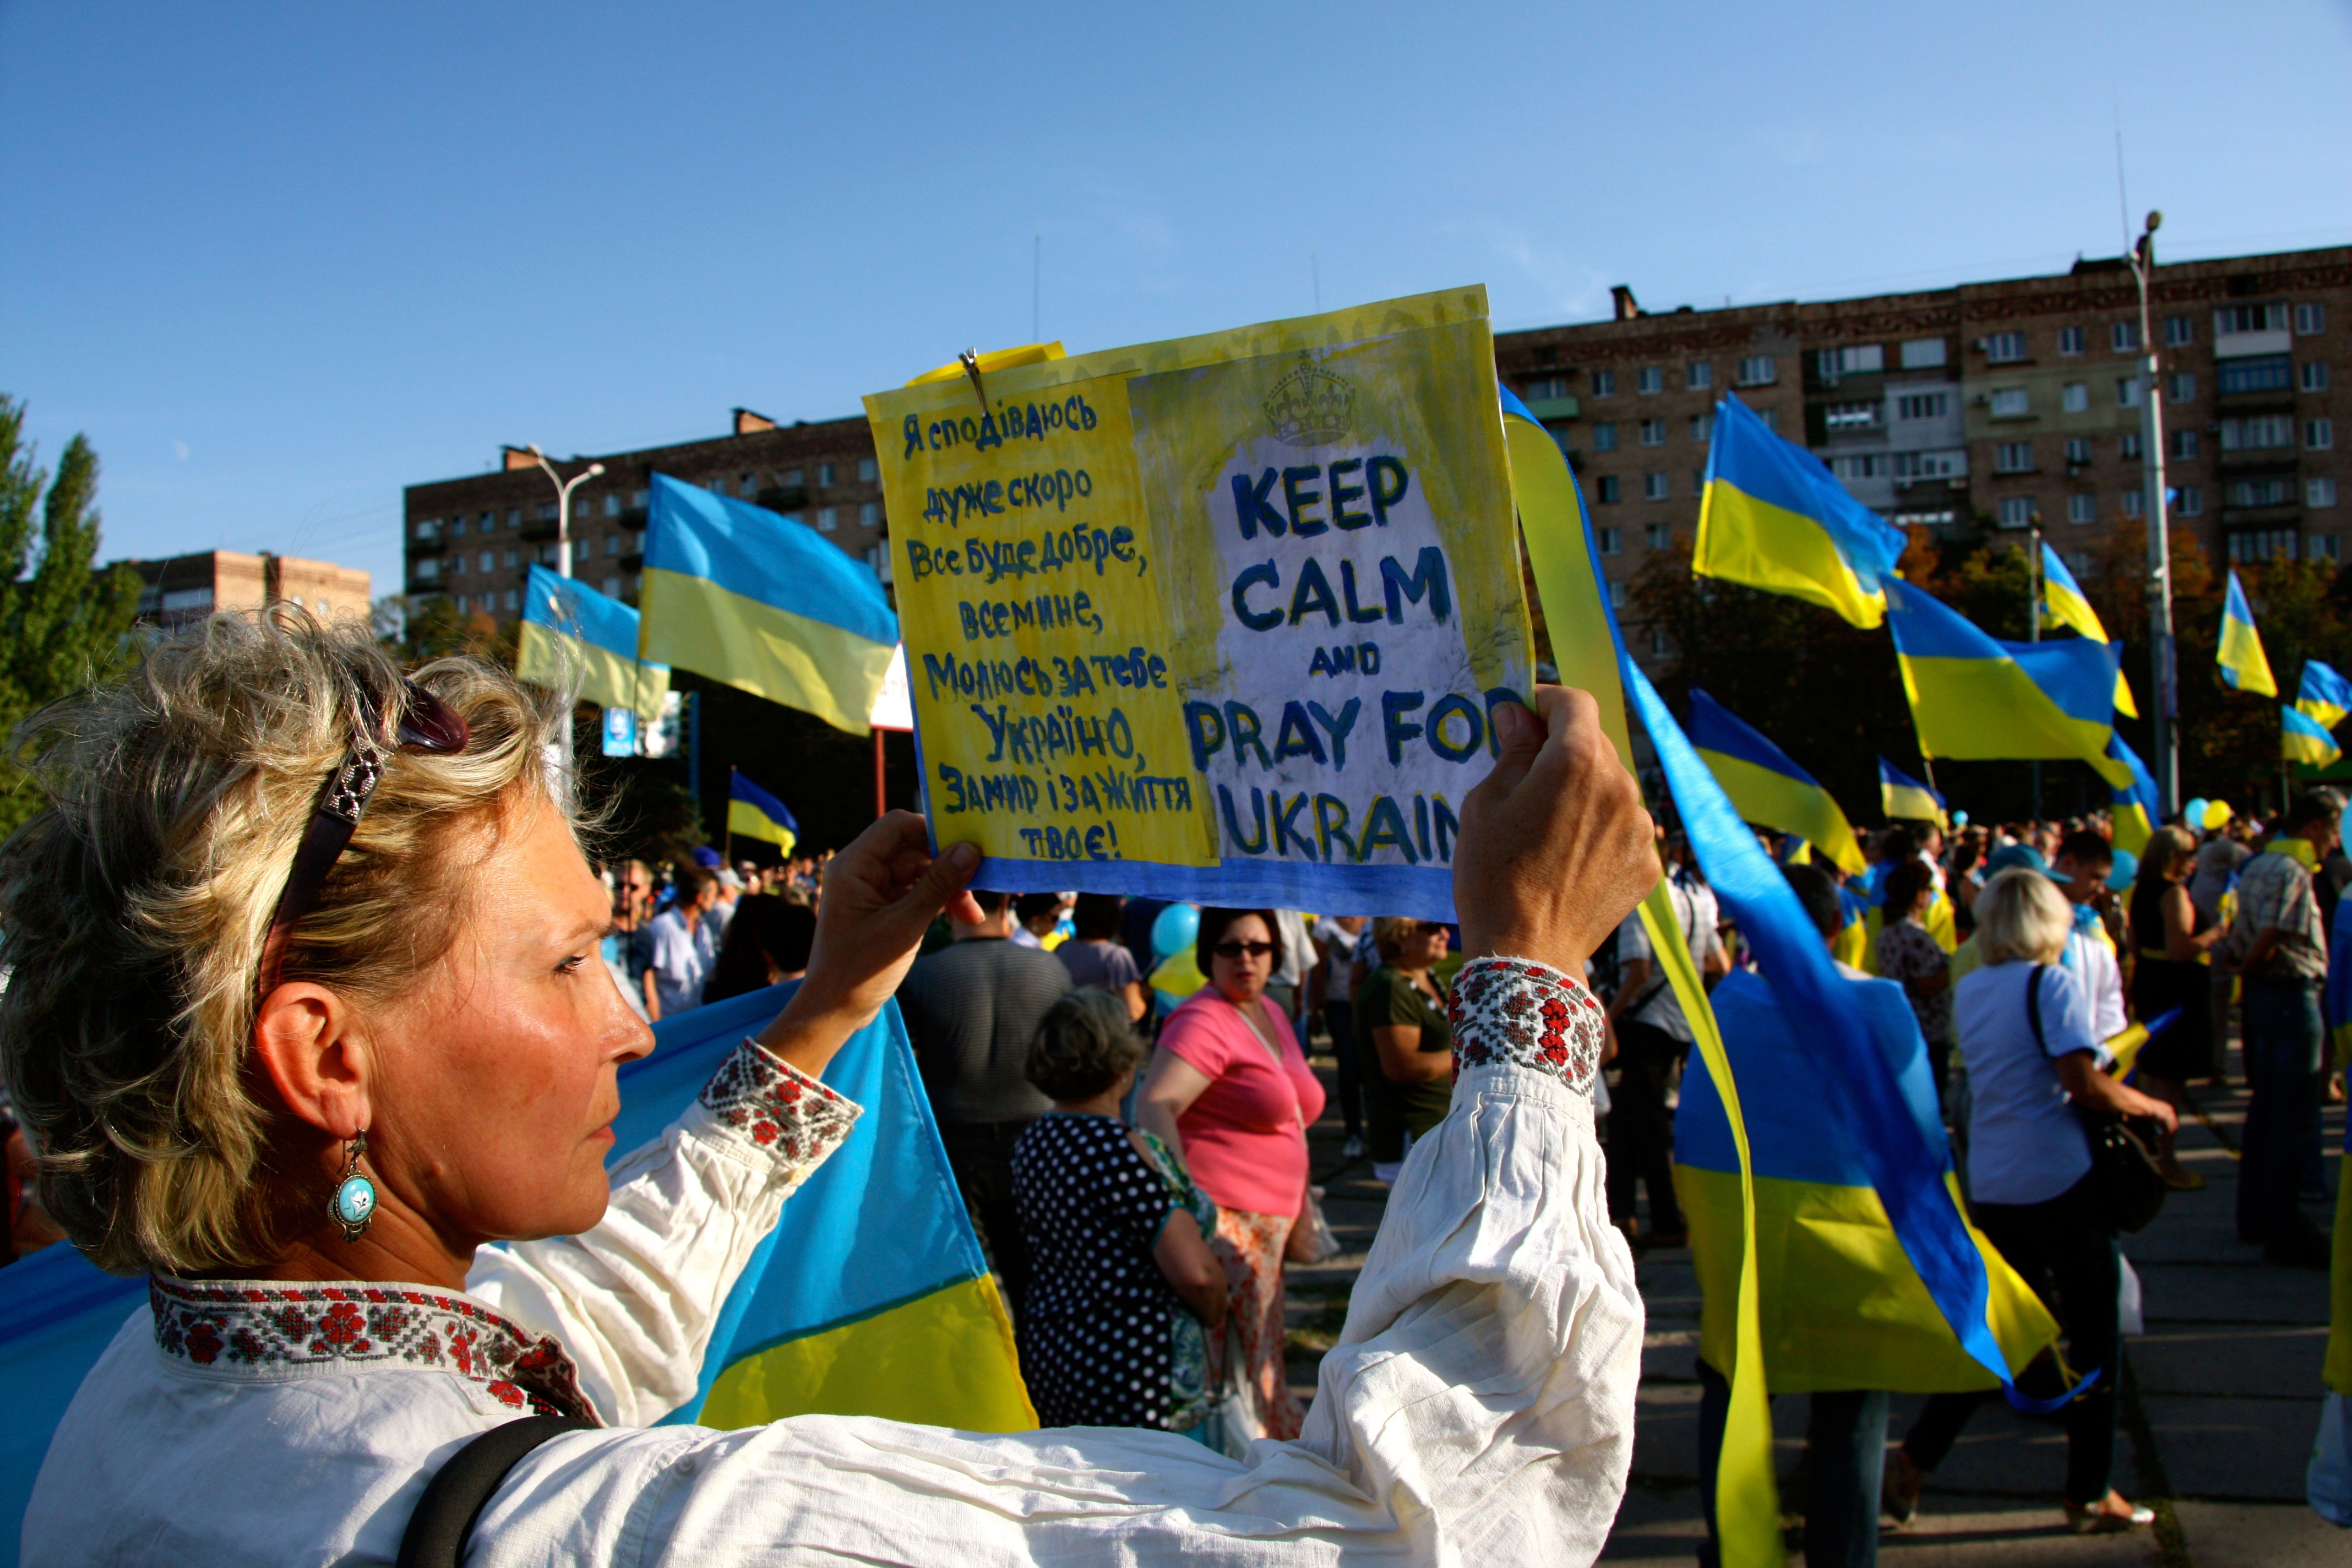 A pro-Ukraine rally in Mariupol in September 2014, as a tank battle raged outside the city.